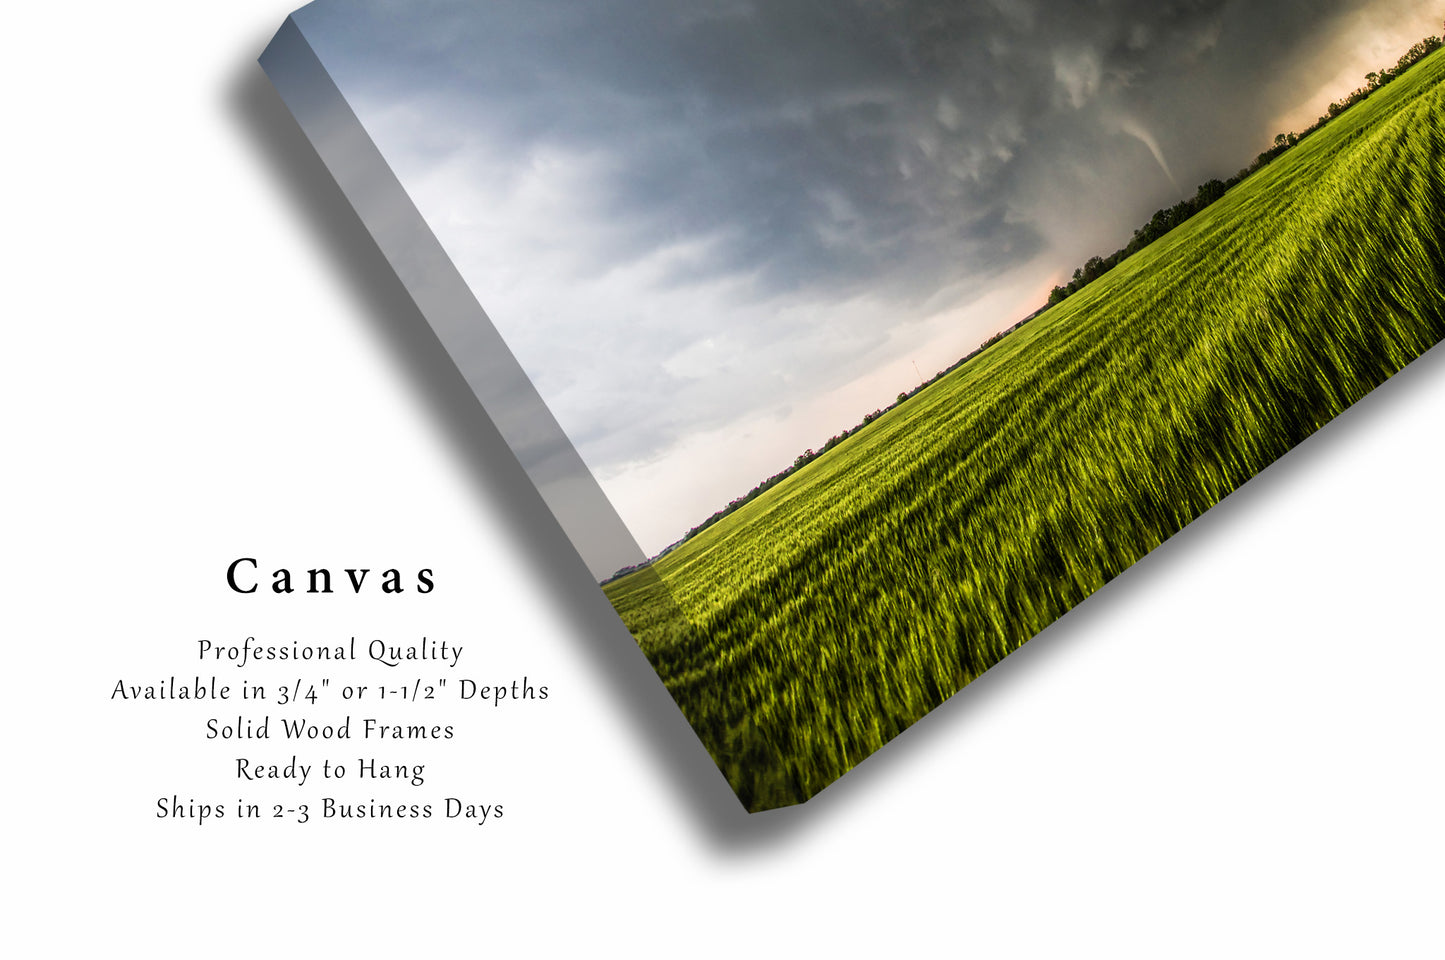 Canvas Wall Art | Tornado Picture | Thunderstorm Gallery Wrap | Kansas Photography | Extreme Weather Decor